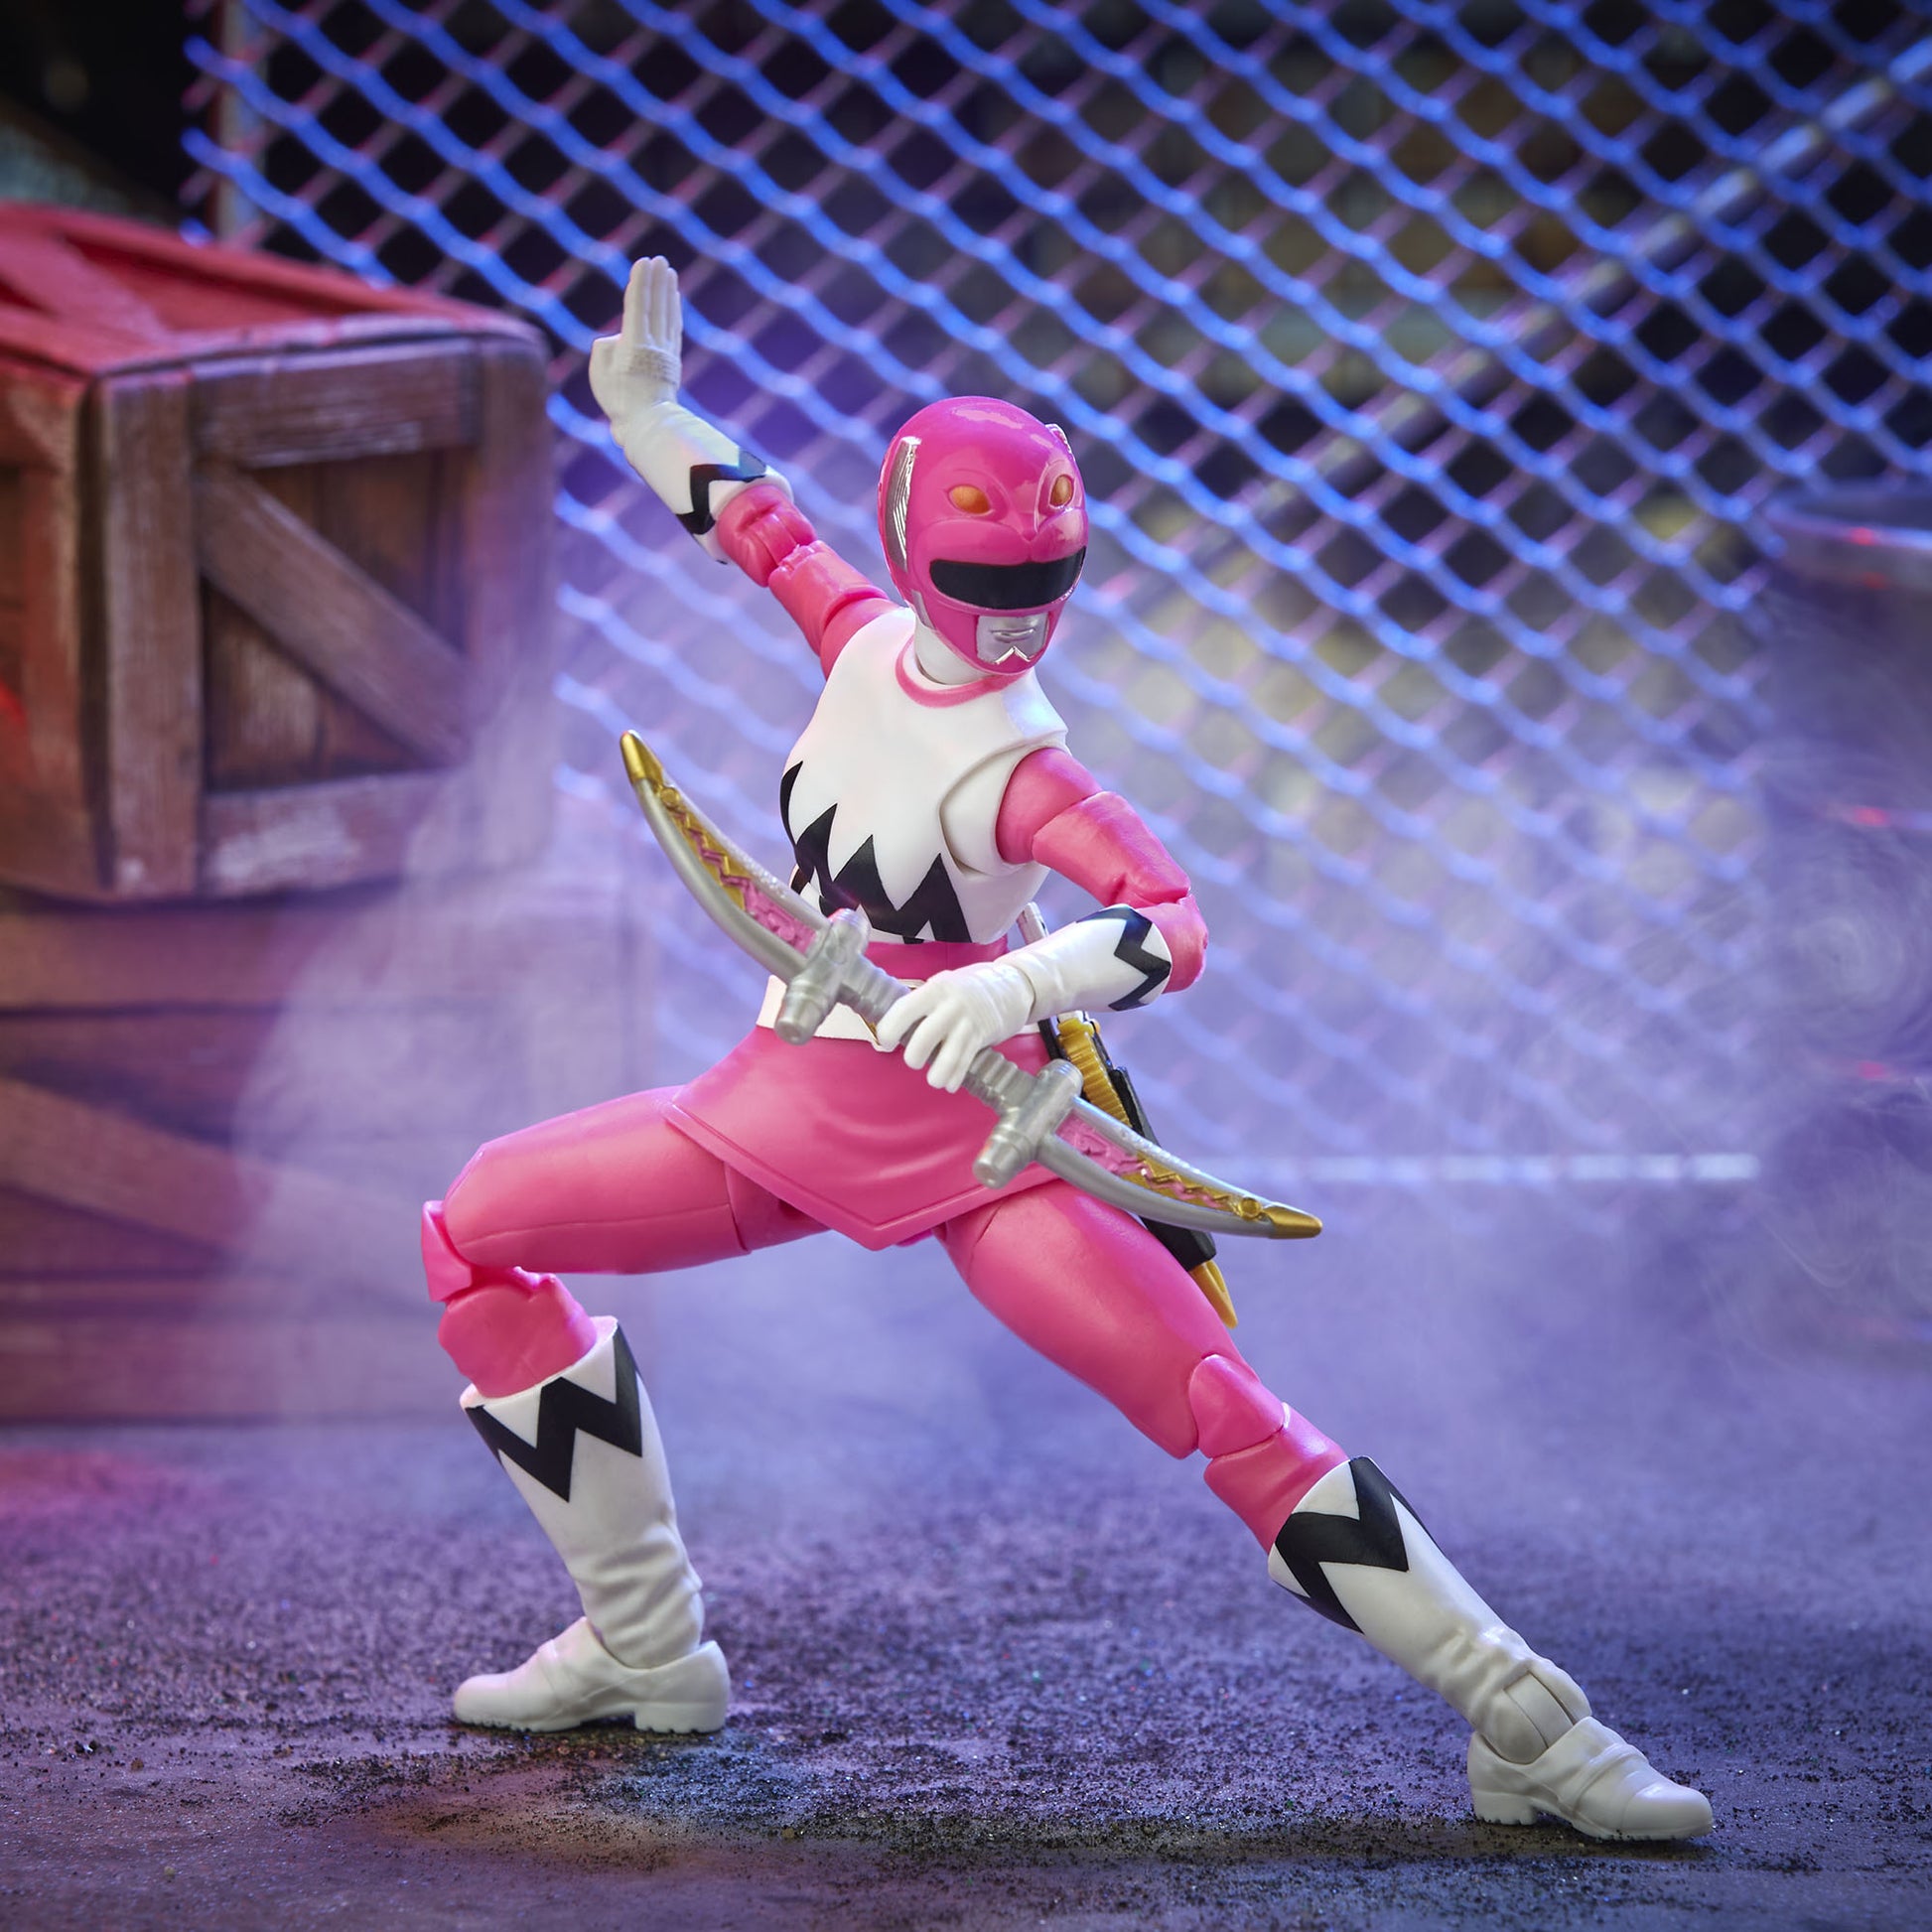 Power Rangers Lightning Collection Lost Galaxy Pink Ranger Figure Toy attack pose - Heretoserveyou